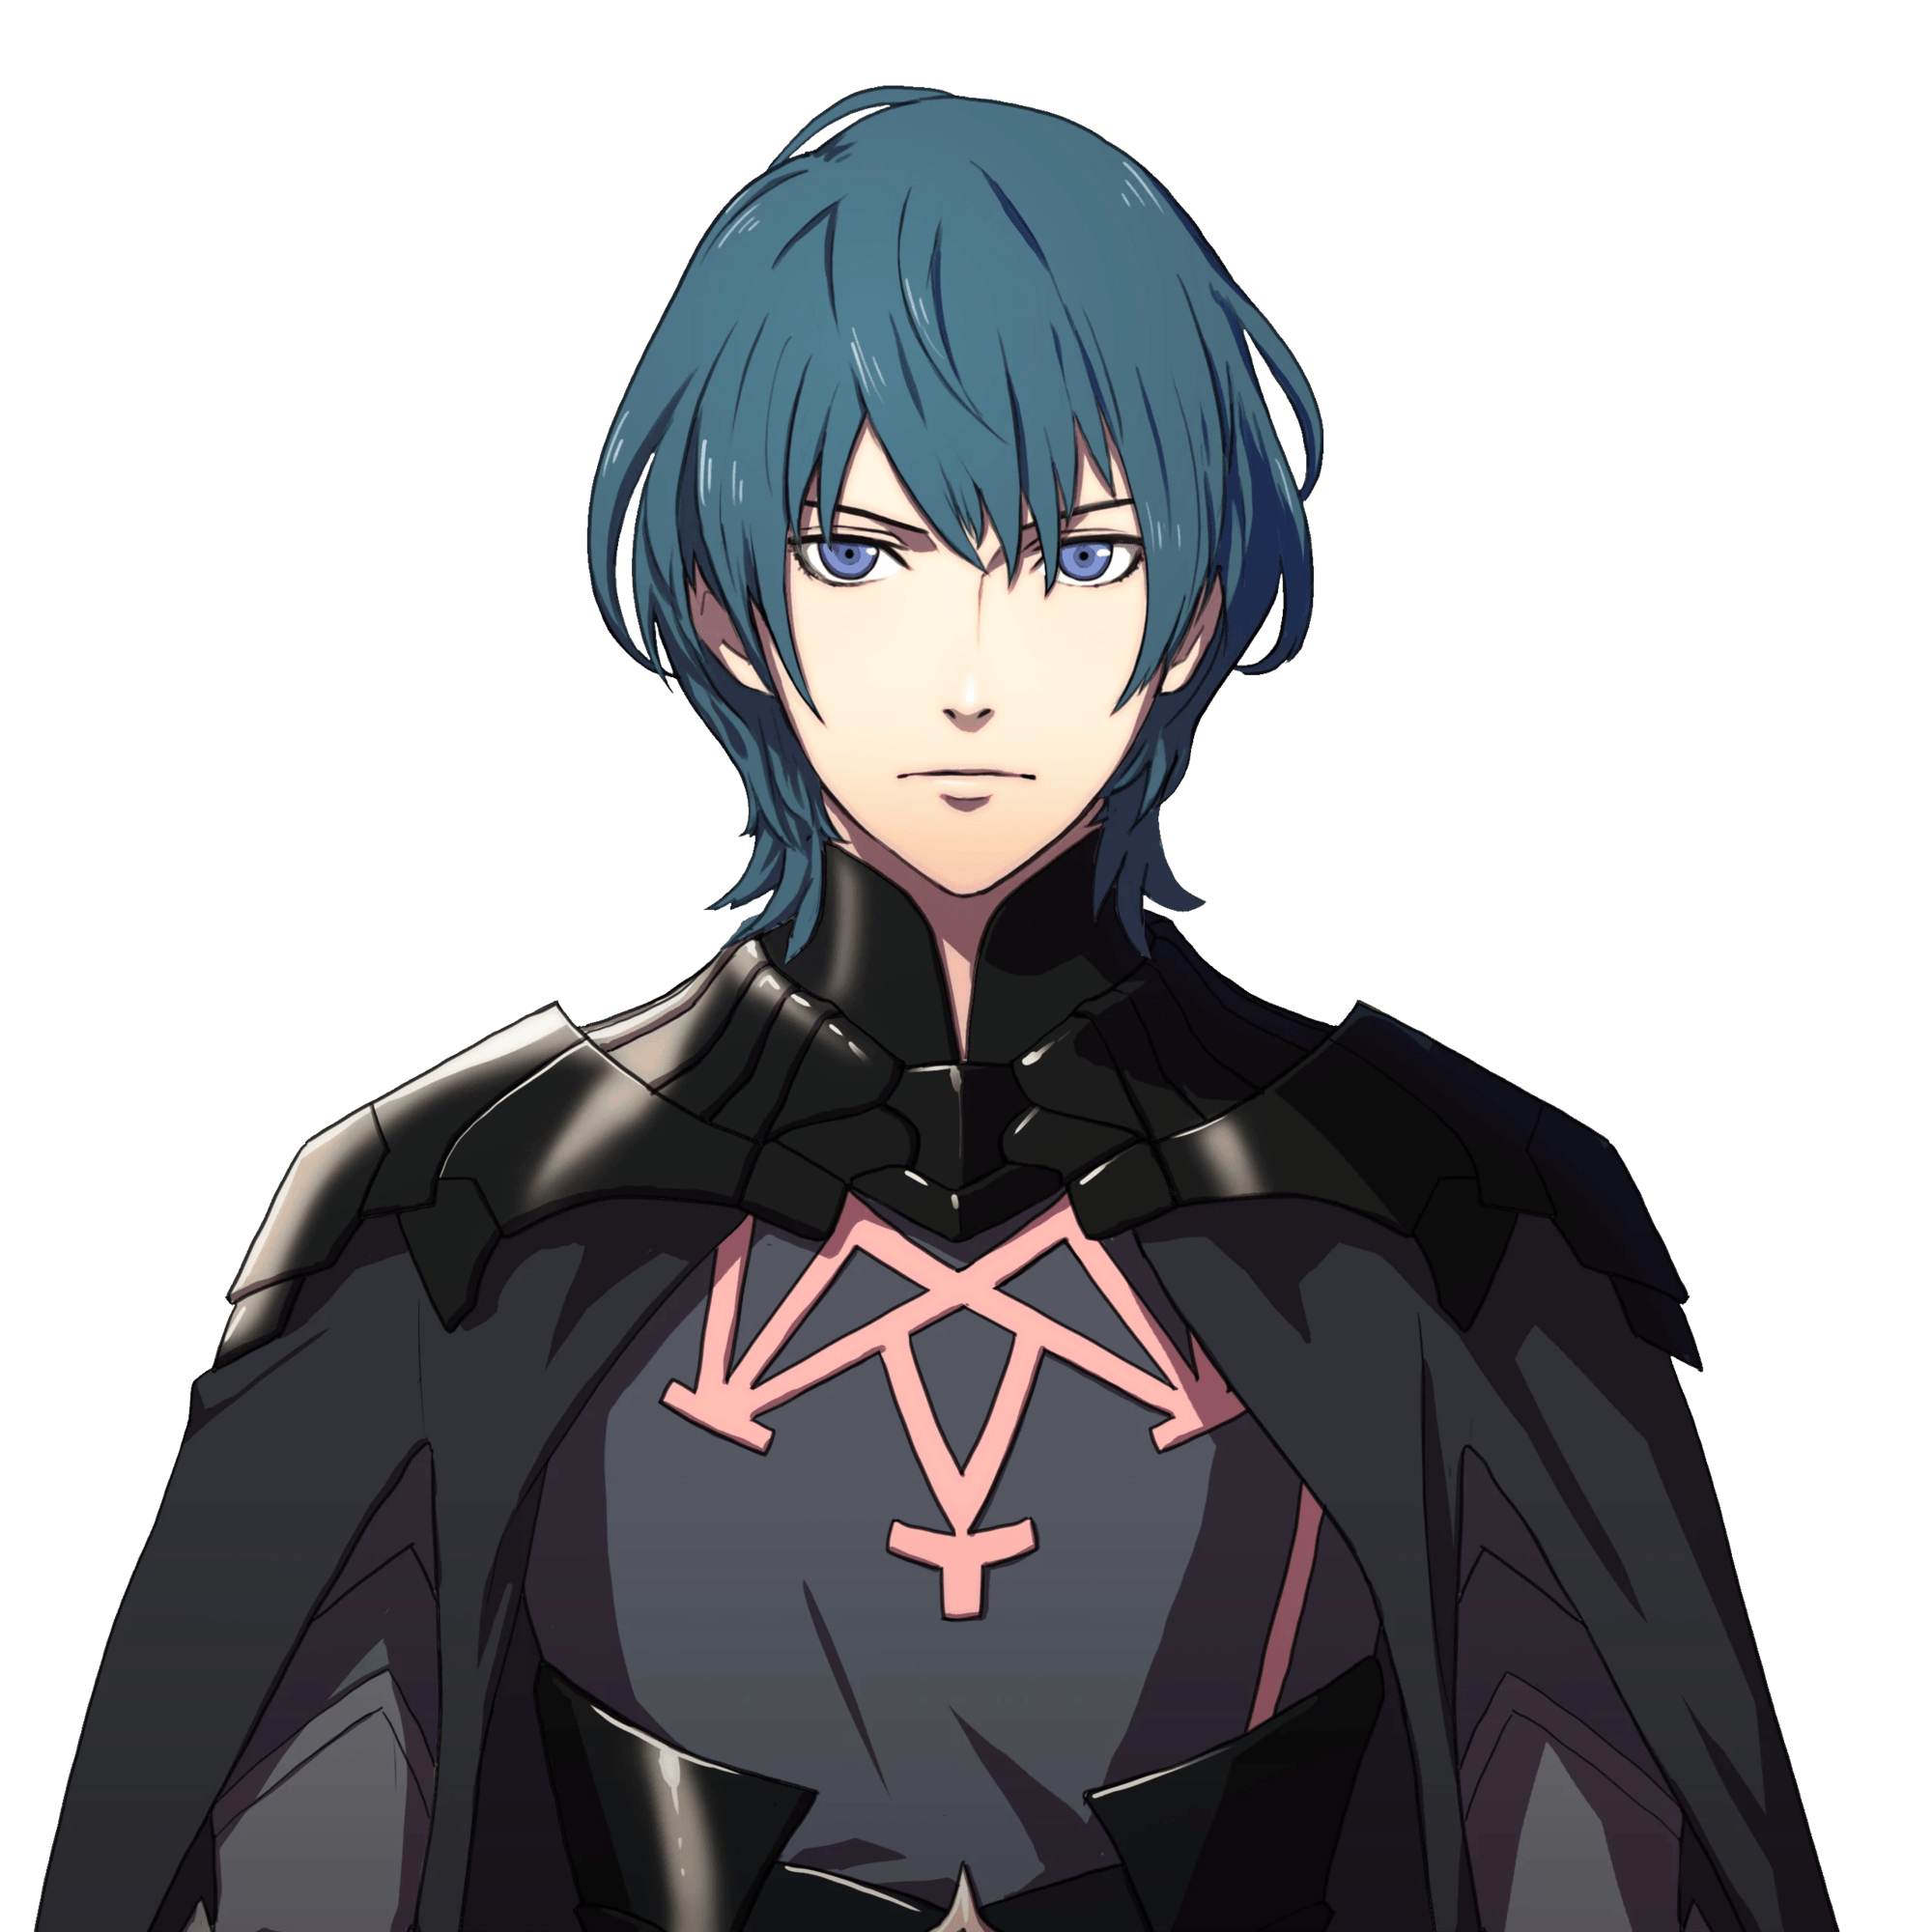 List of characters in Fire Emblem: Three Houses